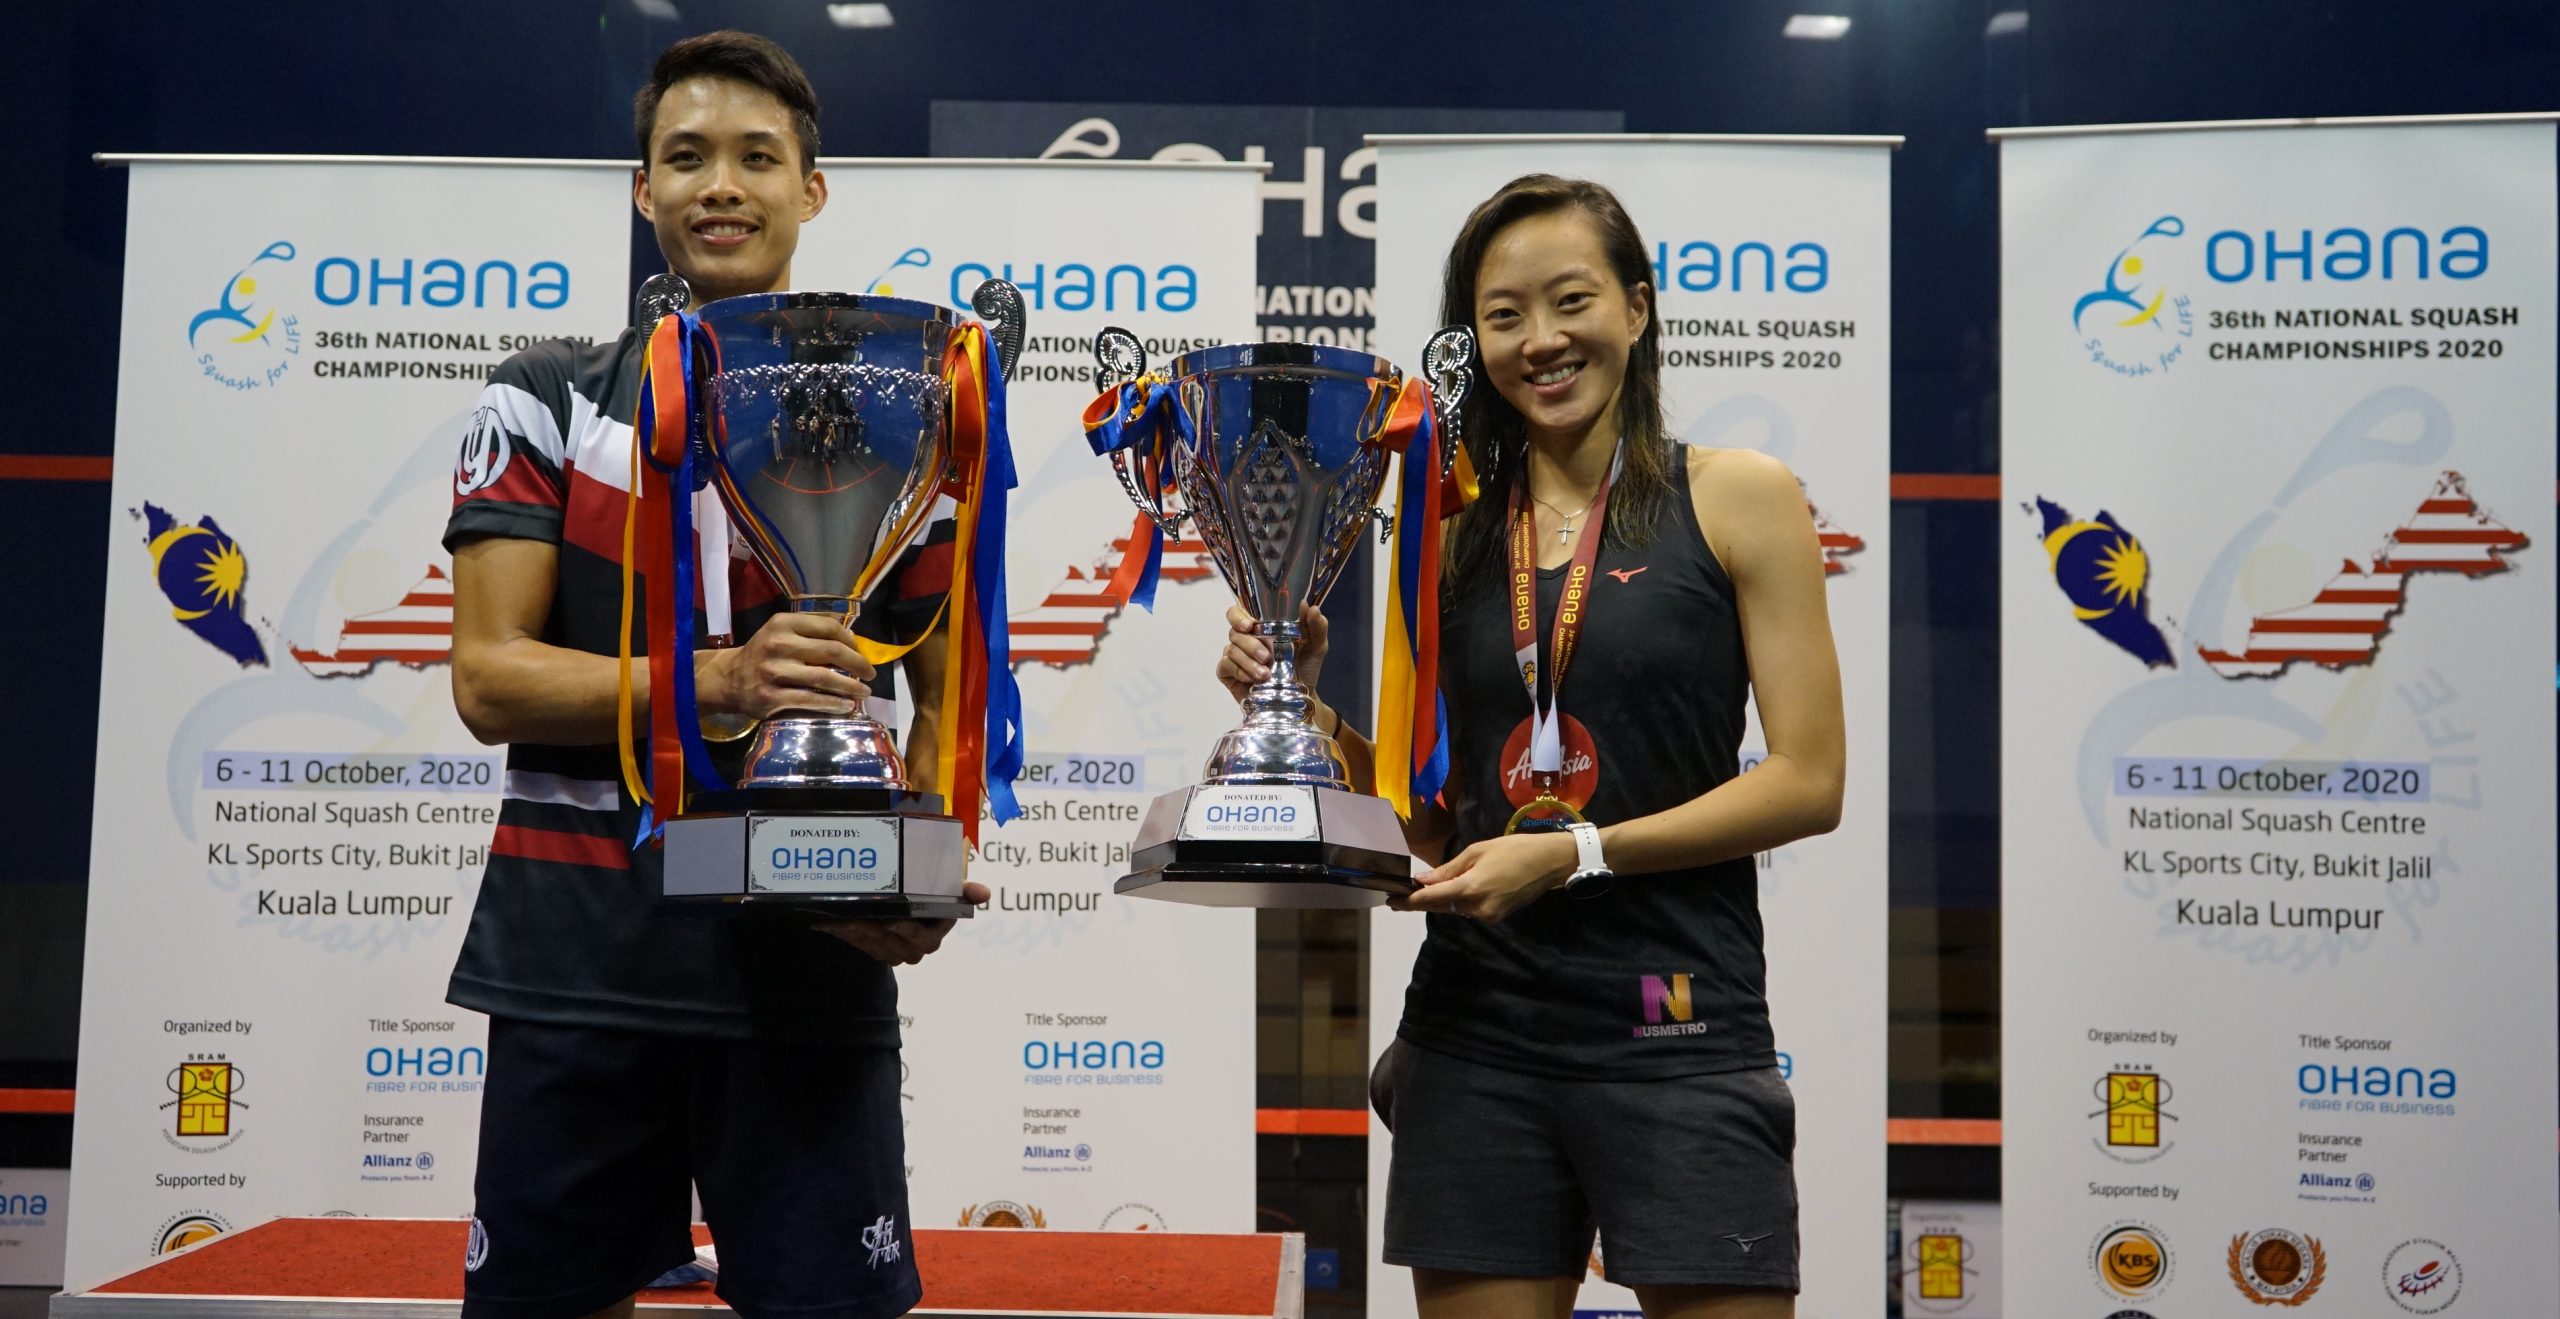 It's four national titles each for Low Wee Wern and Ivan Yuen - Squash Mad